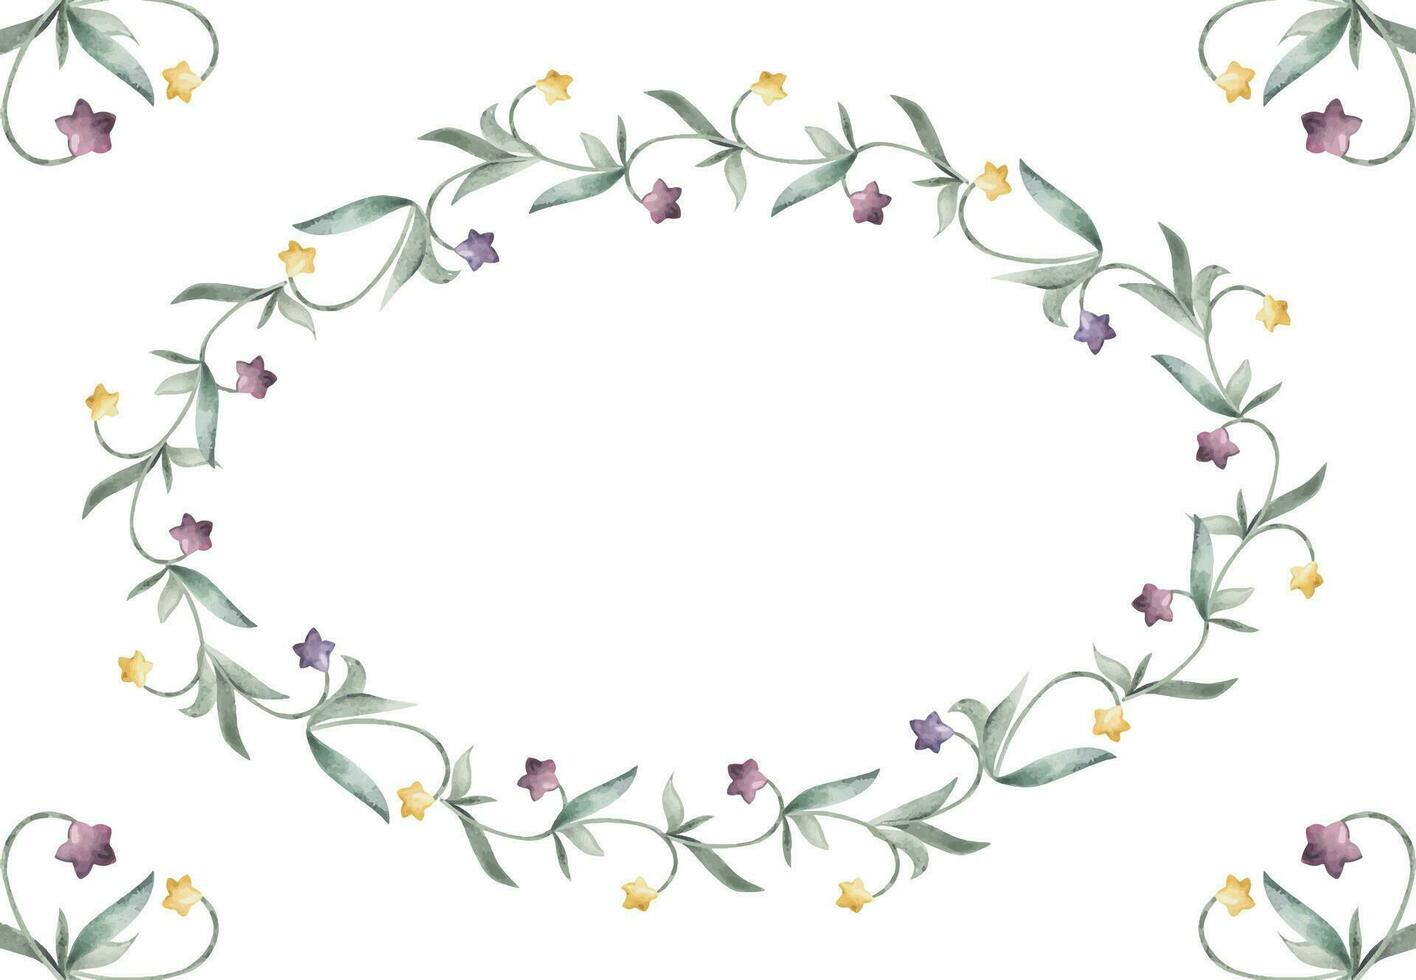 Watercolor hand drawn illustration, magical star flowers with textured effect. Wreath frame circle border Isolated on white background. For kids, children bedroom, fabric, linens print, invitation vector